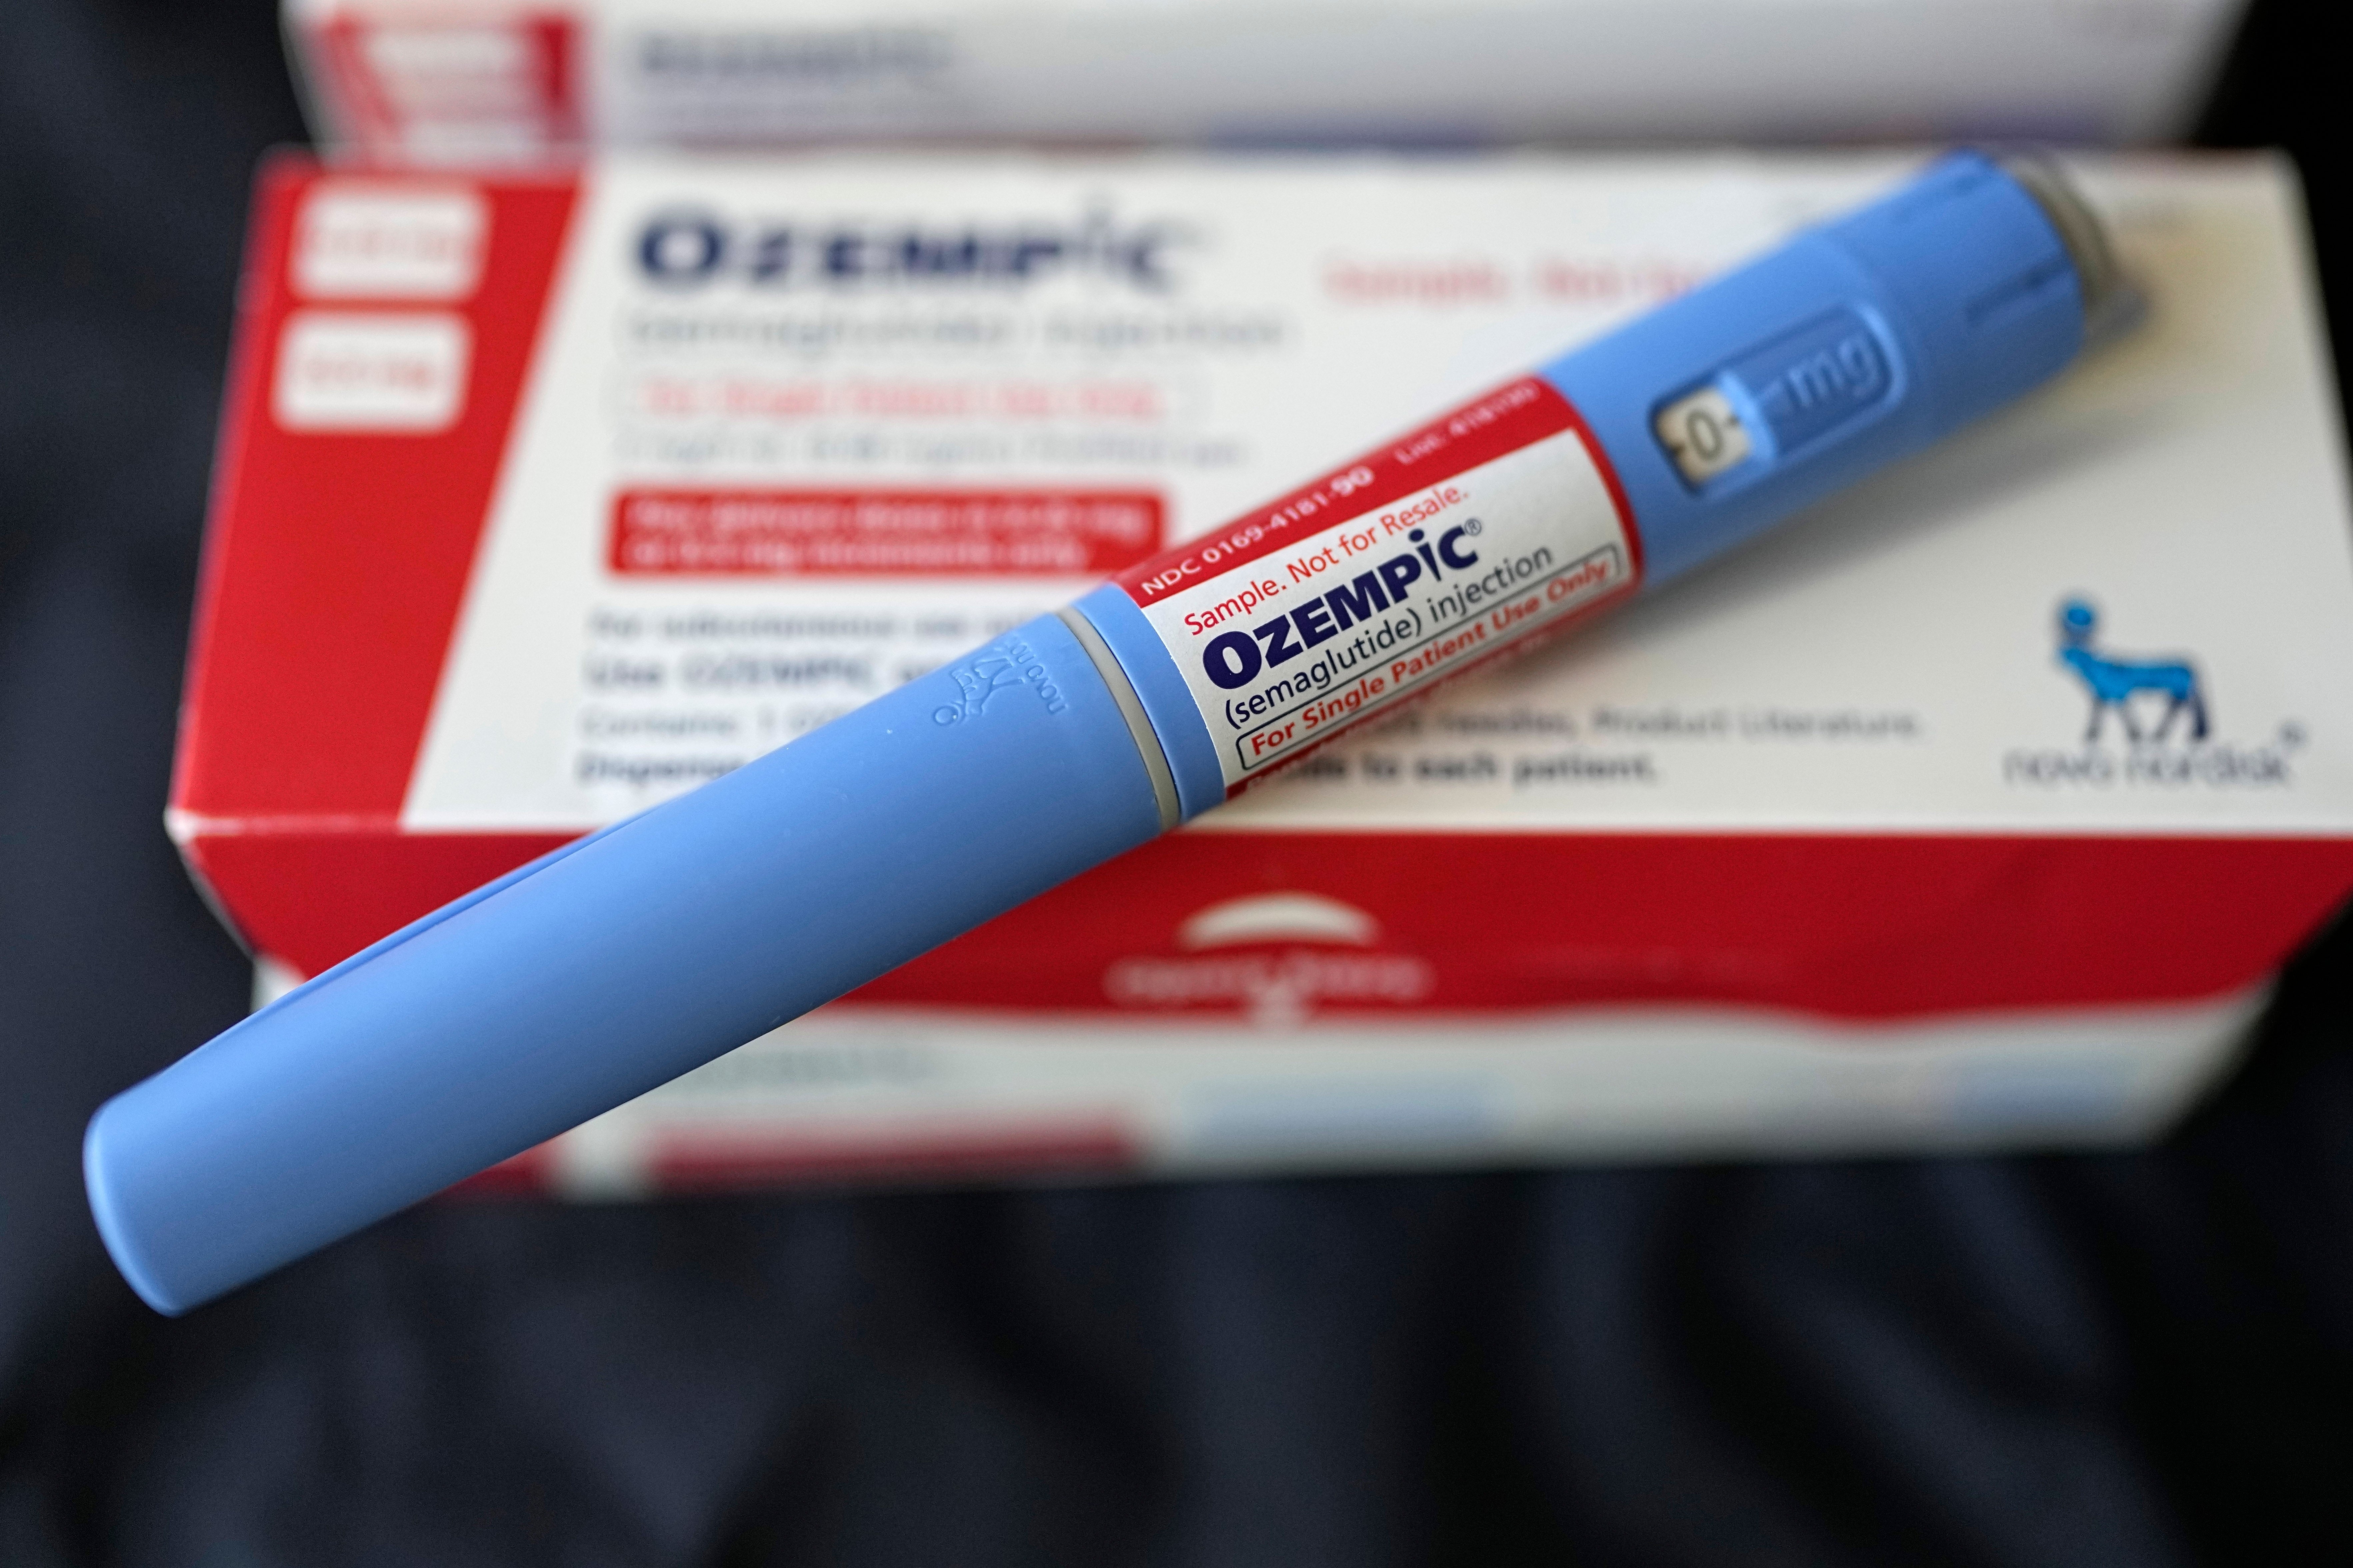 The injectable drug Ozempic